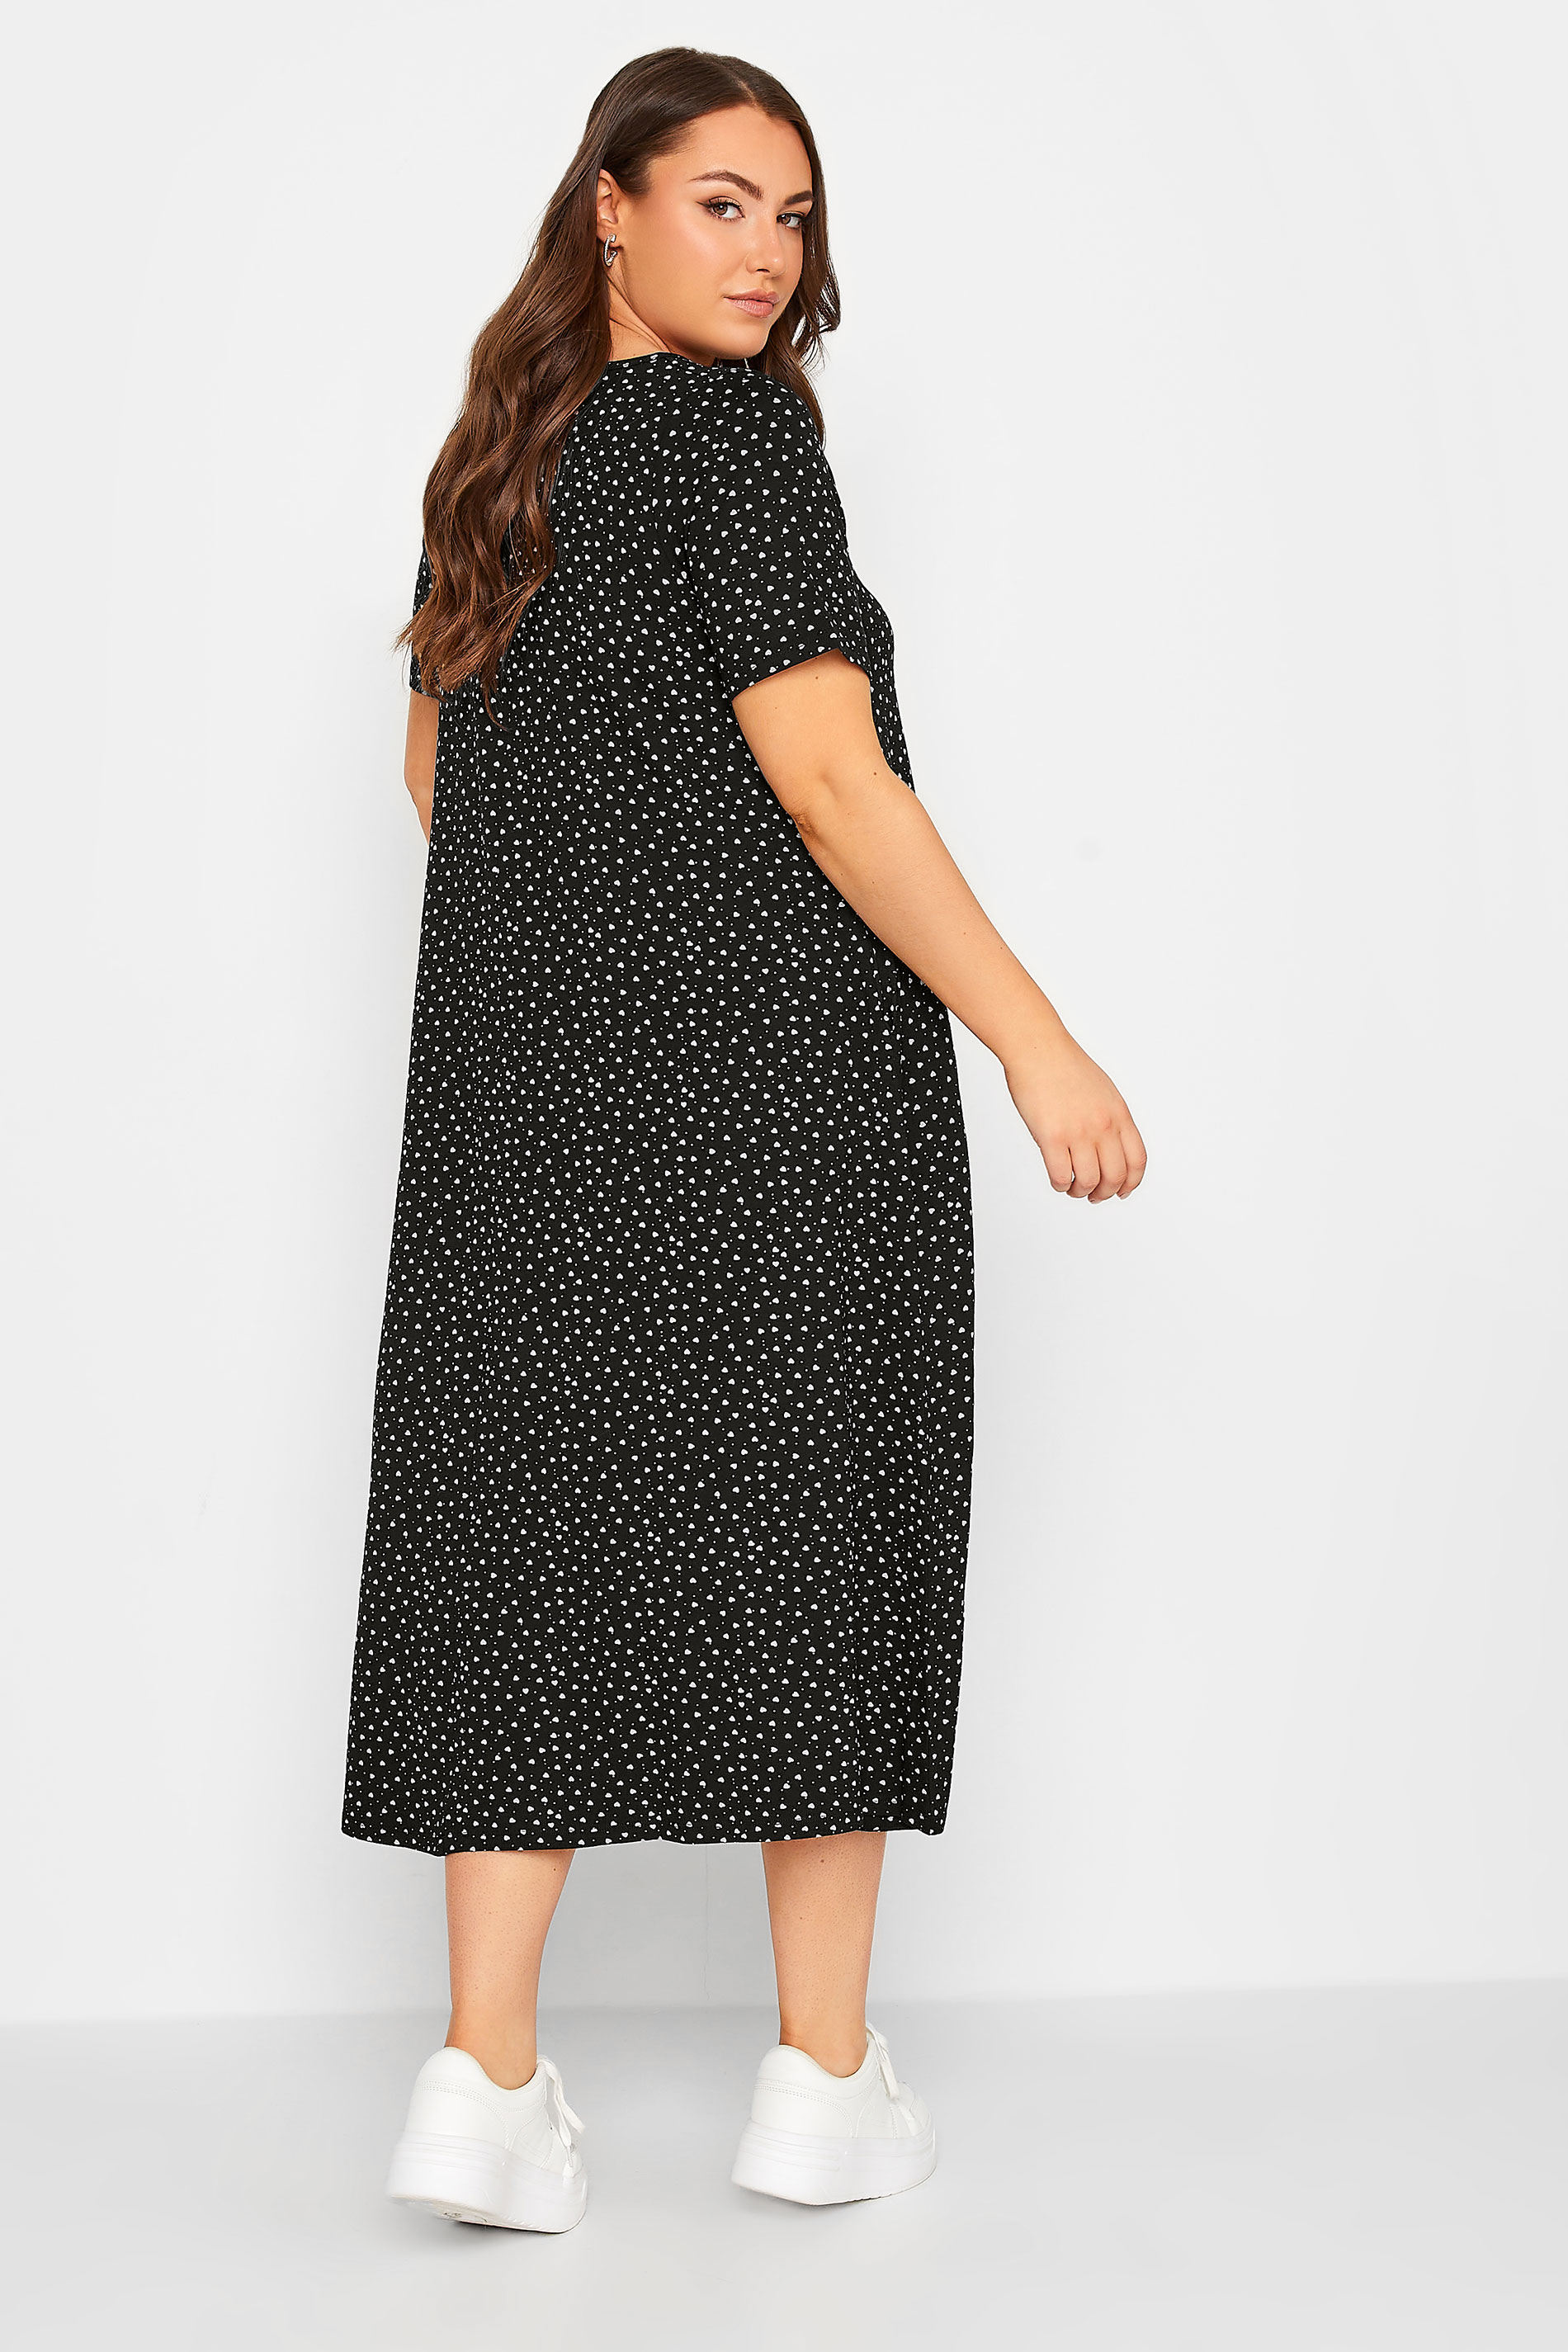 YOURS Plus Size Black Heart Print Maxi Dress | Yours Clothing 3